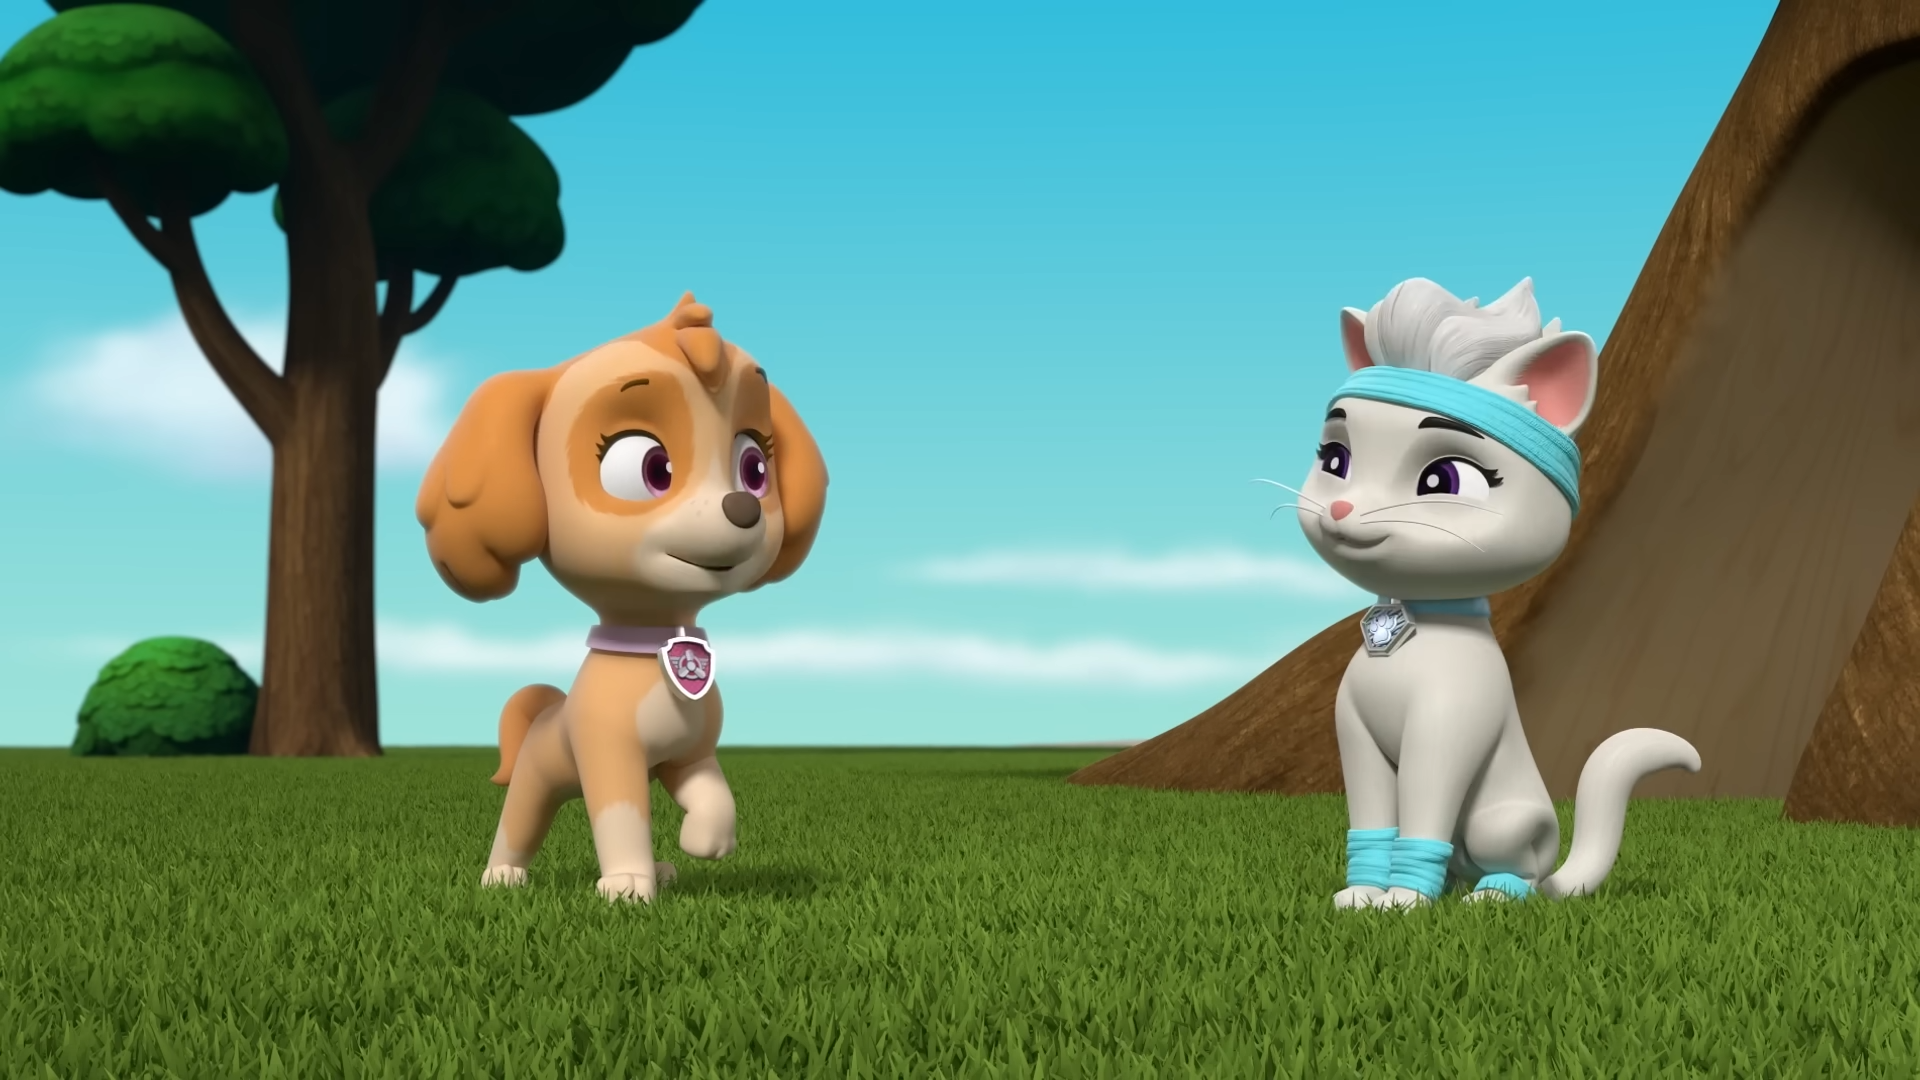 https://static.wikia.nocookie.net/paw-patrol/images/a/a1/Skye_and_Rory_Flip_it_%281%29.png/revision/latest?cb=20221023081722